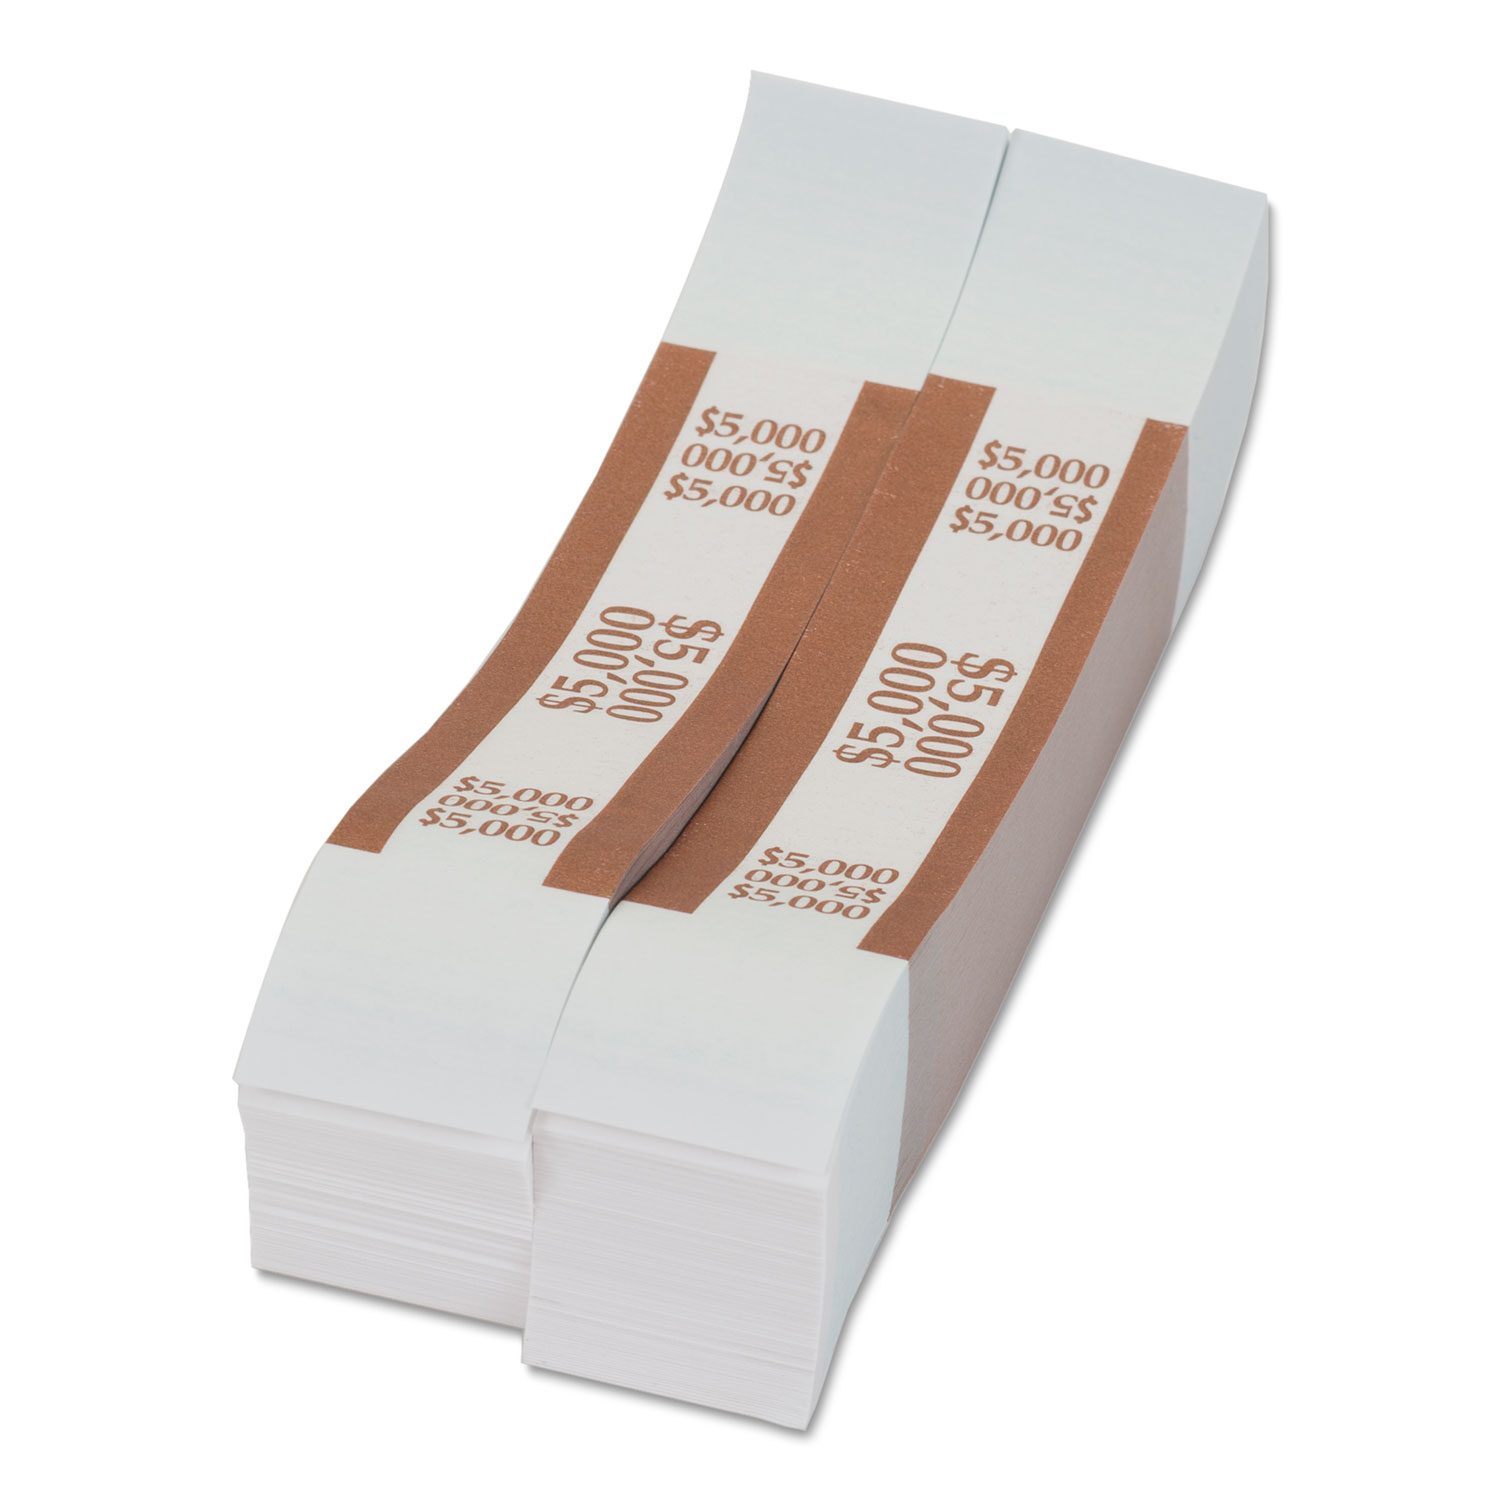 currency-straps-brown-5-000-in-50-bills-1000-bands-pack-calvin